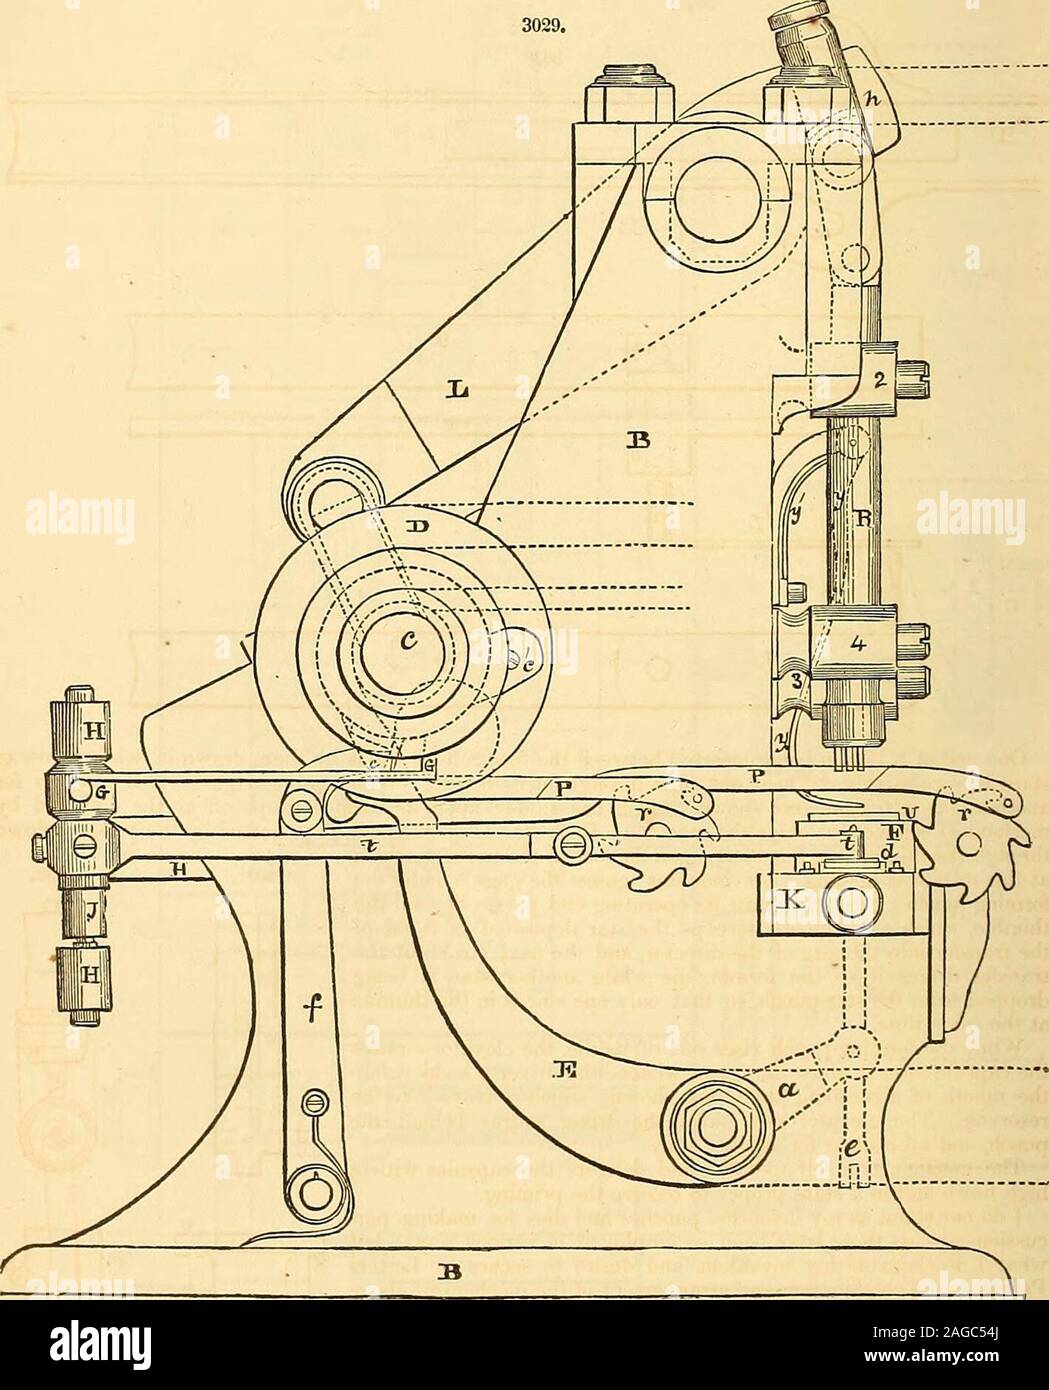 . Appleton's dictionary of machines, mechanics, engine-work, and engineering. GG, tfcc, cam-lever of the transfer apparatus. It is fast on its axis J J, which works in the bracketHH, Ac, aud is operated by the cylinder cam I on the crank-arbor, and returned by a spiral sprint; onthe axis J J. The lever 11 is free on the axis J J, but. is constrained to move in concert with (.!. bymeans of a spring, which allows it, together with the transfer, to yield to extraordinary resistance, whilethe cam and fast lover pursue their way thus preventing injury to tho machine. 470 PERCUSSION-CAP MACHINE. « i Stock Photo